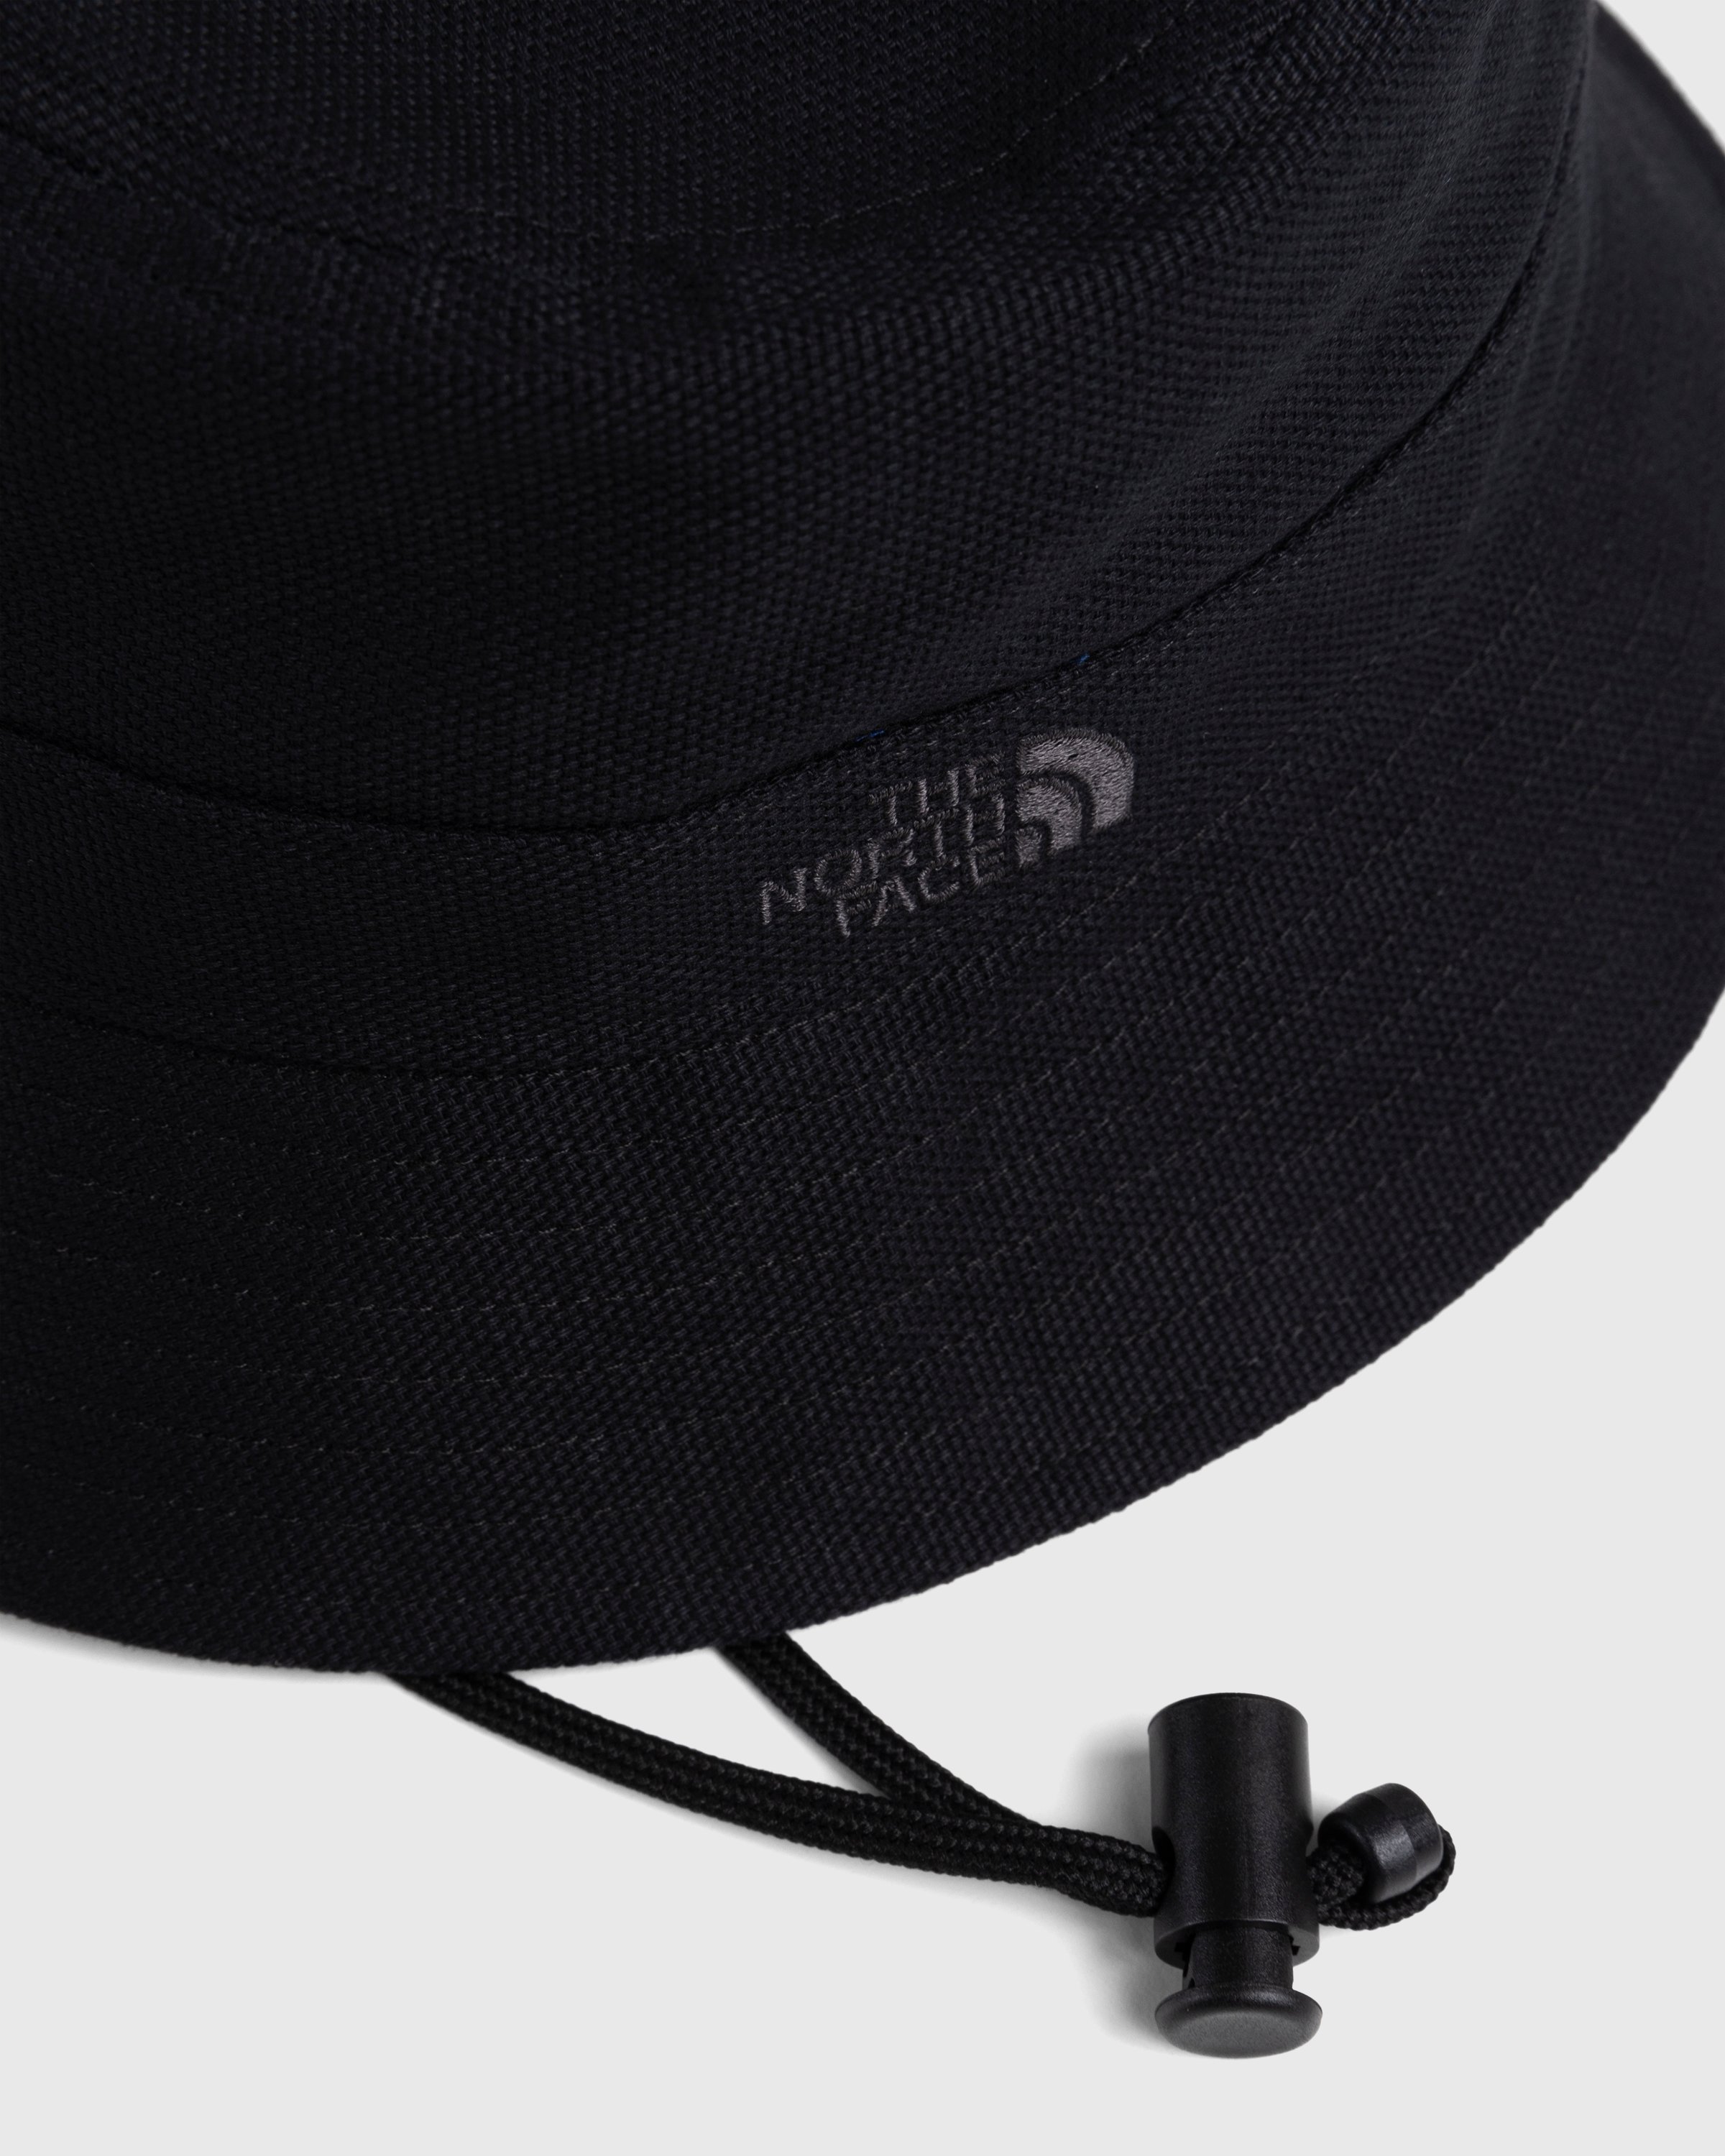 The North Face - Mountain Bucket Hat TNF Black - Accessories - Black - Image 3